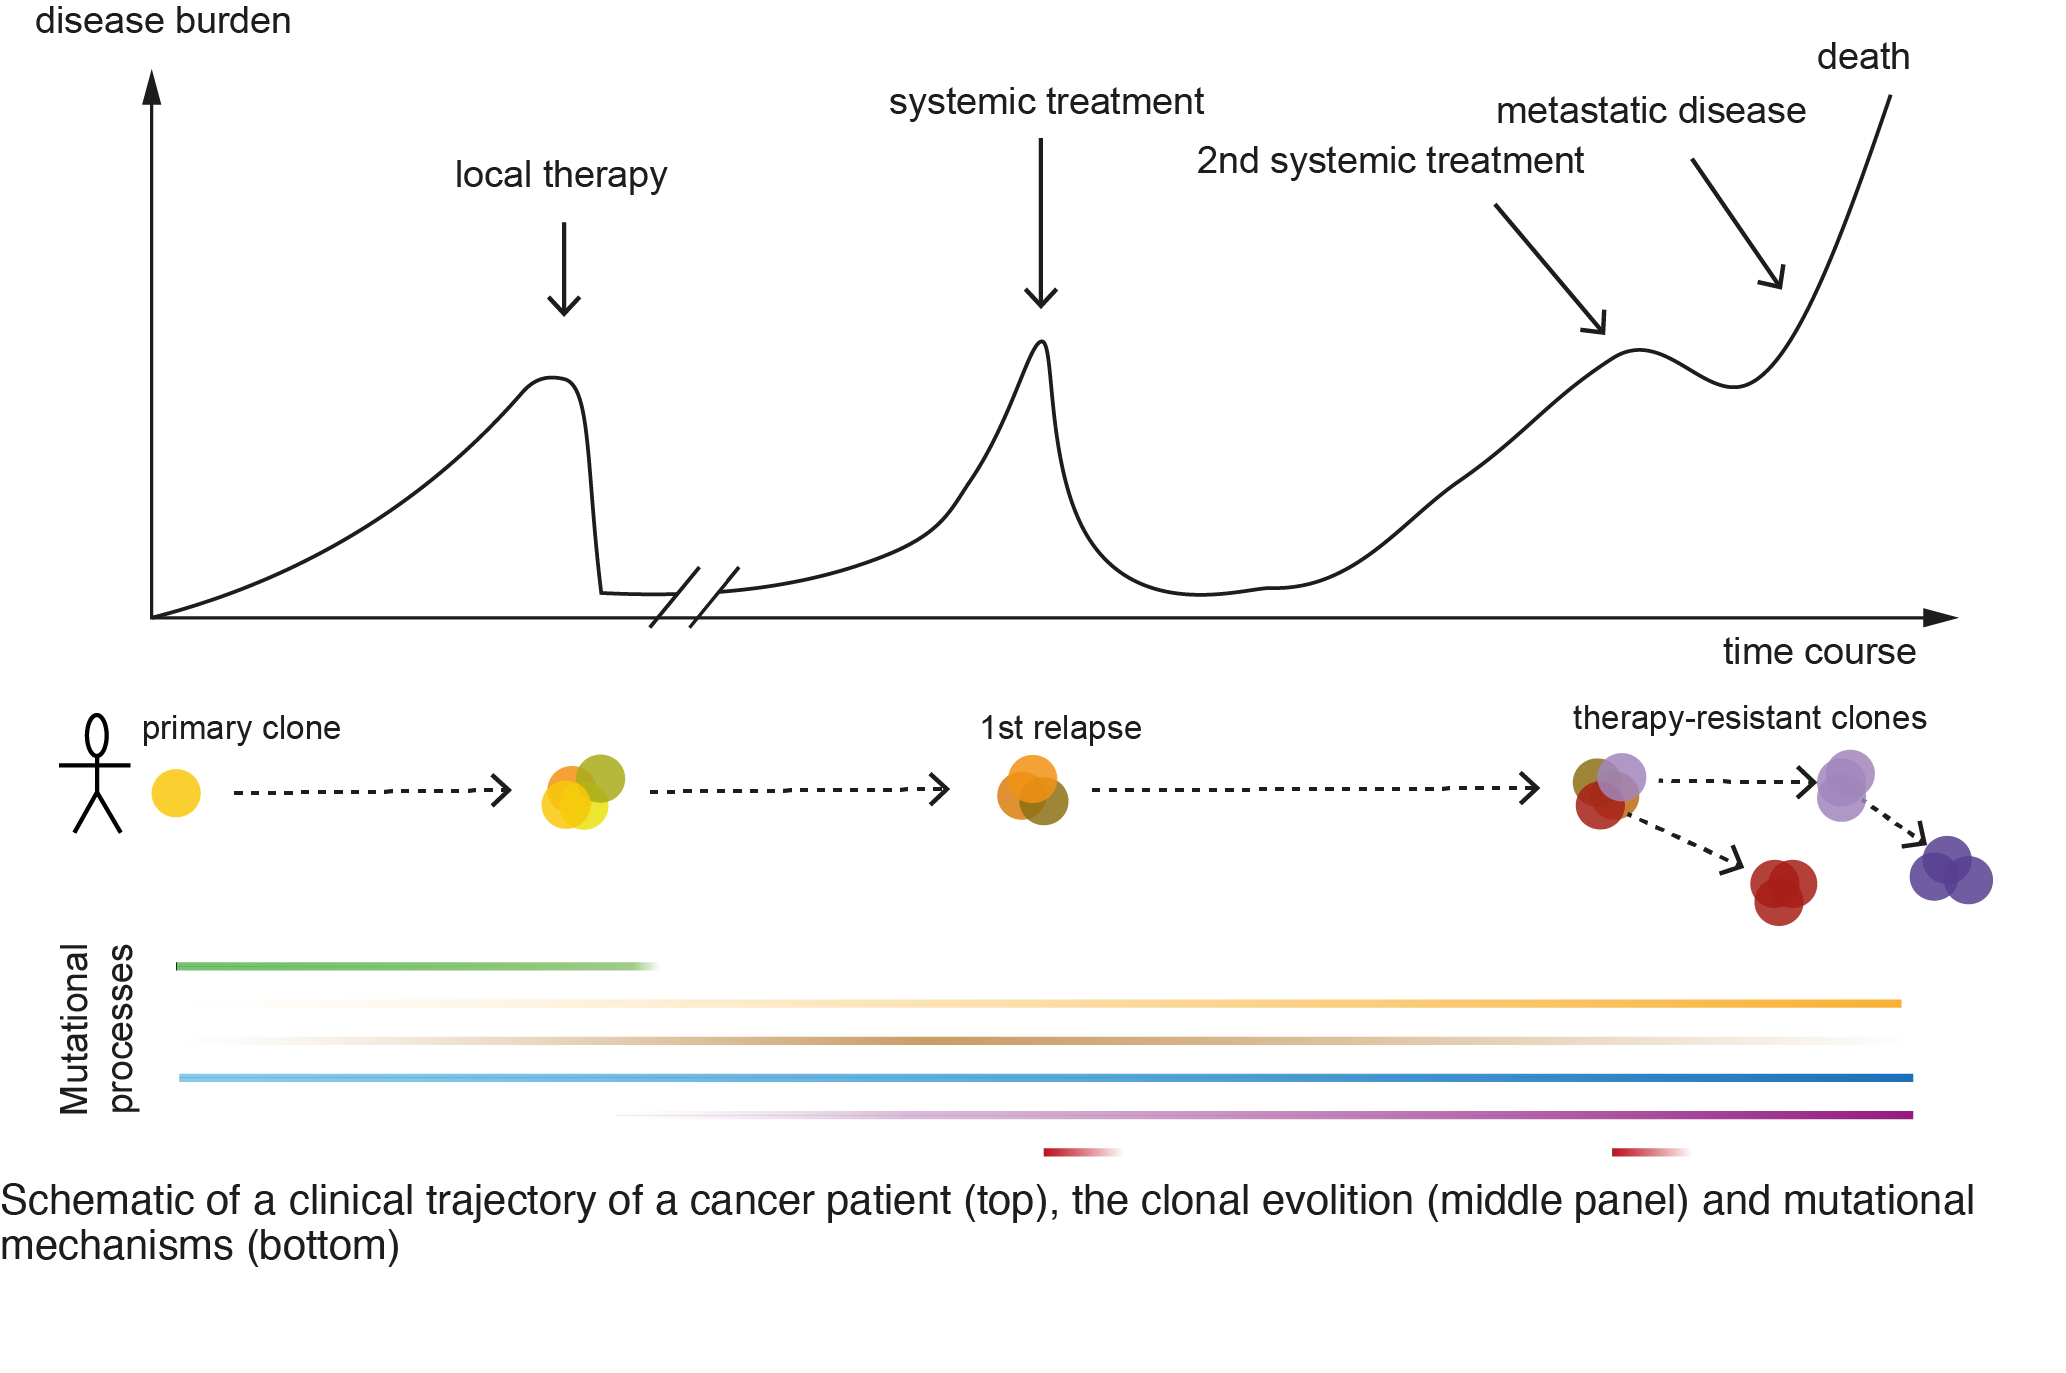 Schematic of a clinical trajectory of a cancer patient (top), the clonal evolition (middle part) and mutational mechanisms (bottom). For detailed description please contact communication@bric.ku.dk